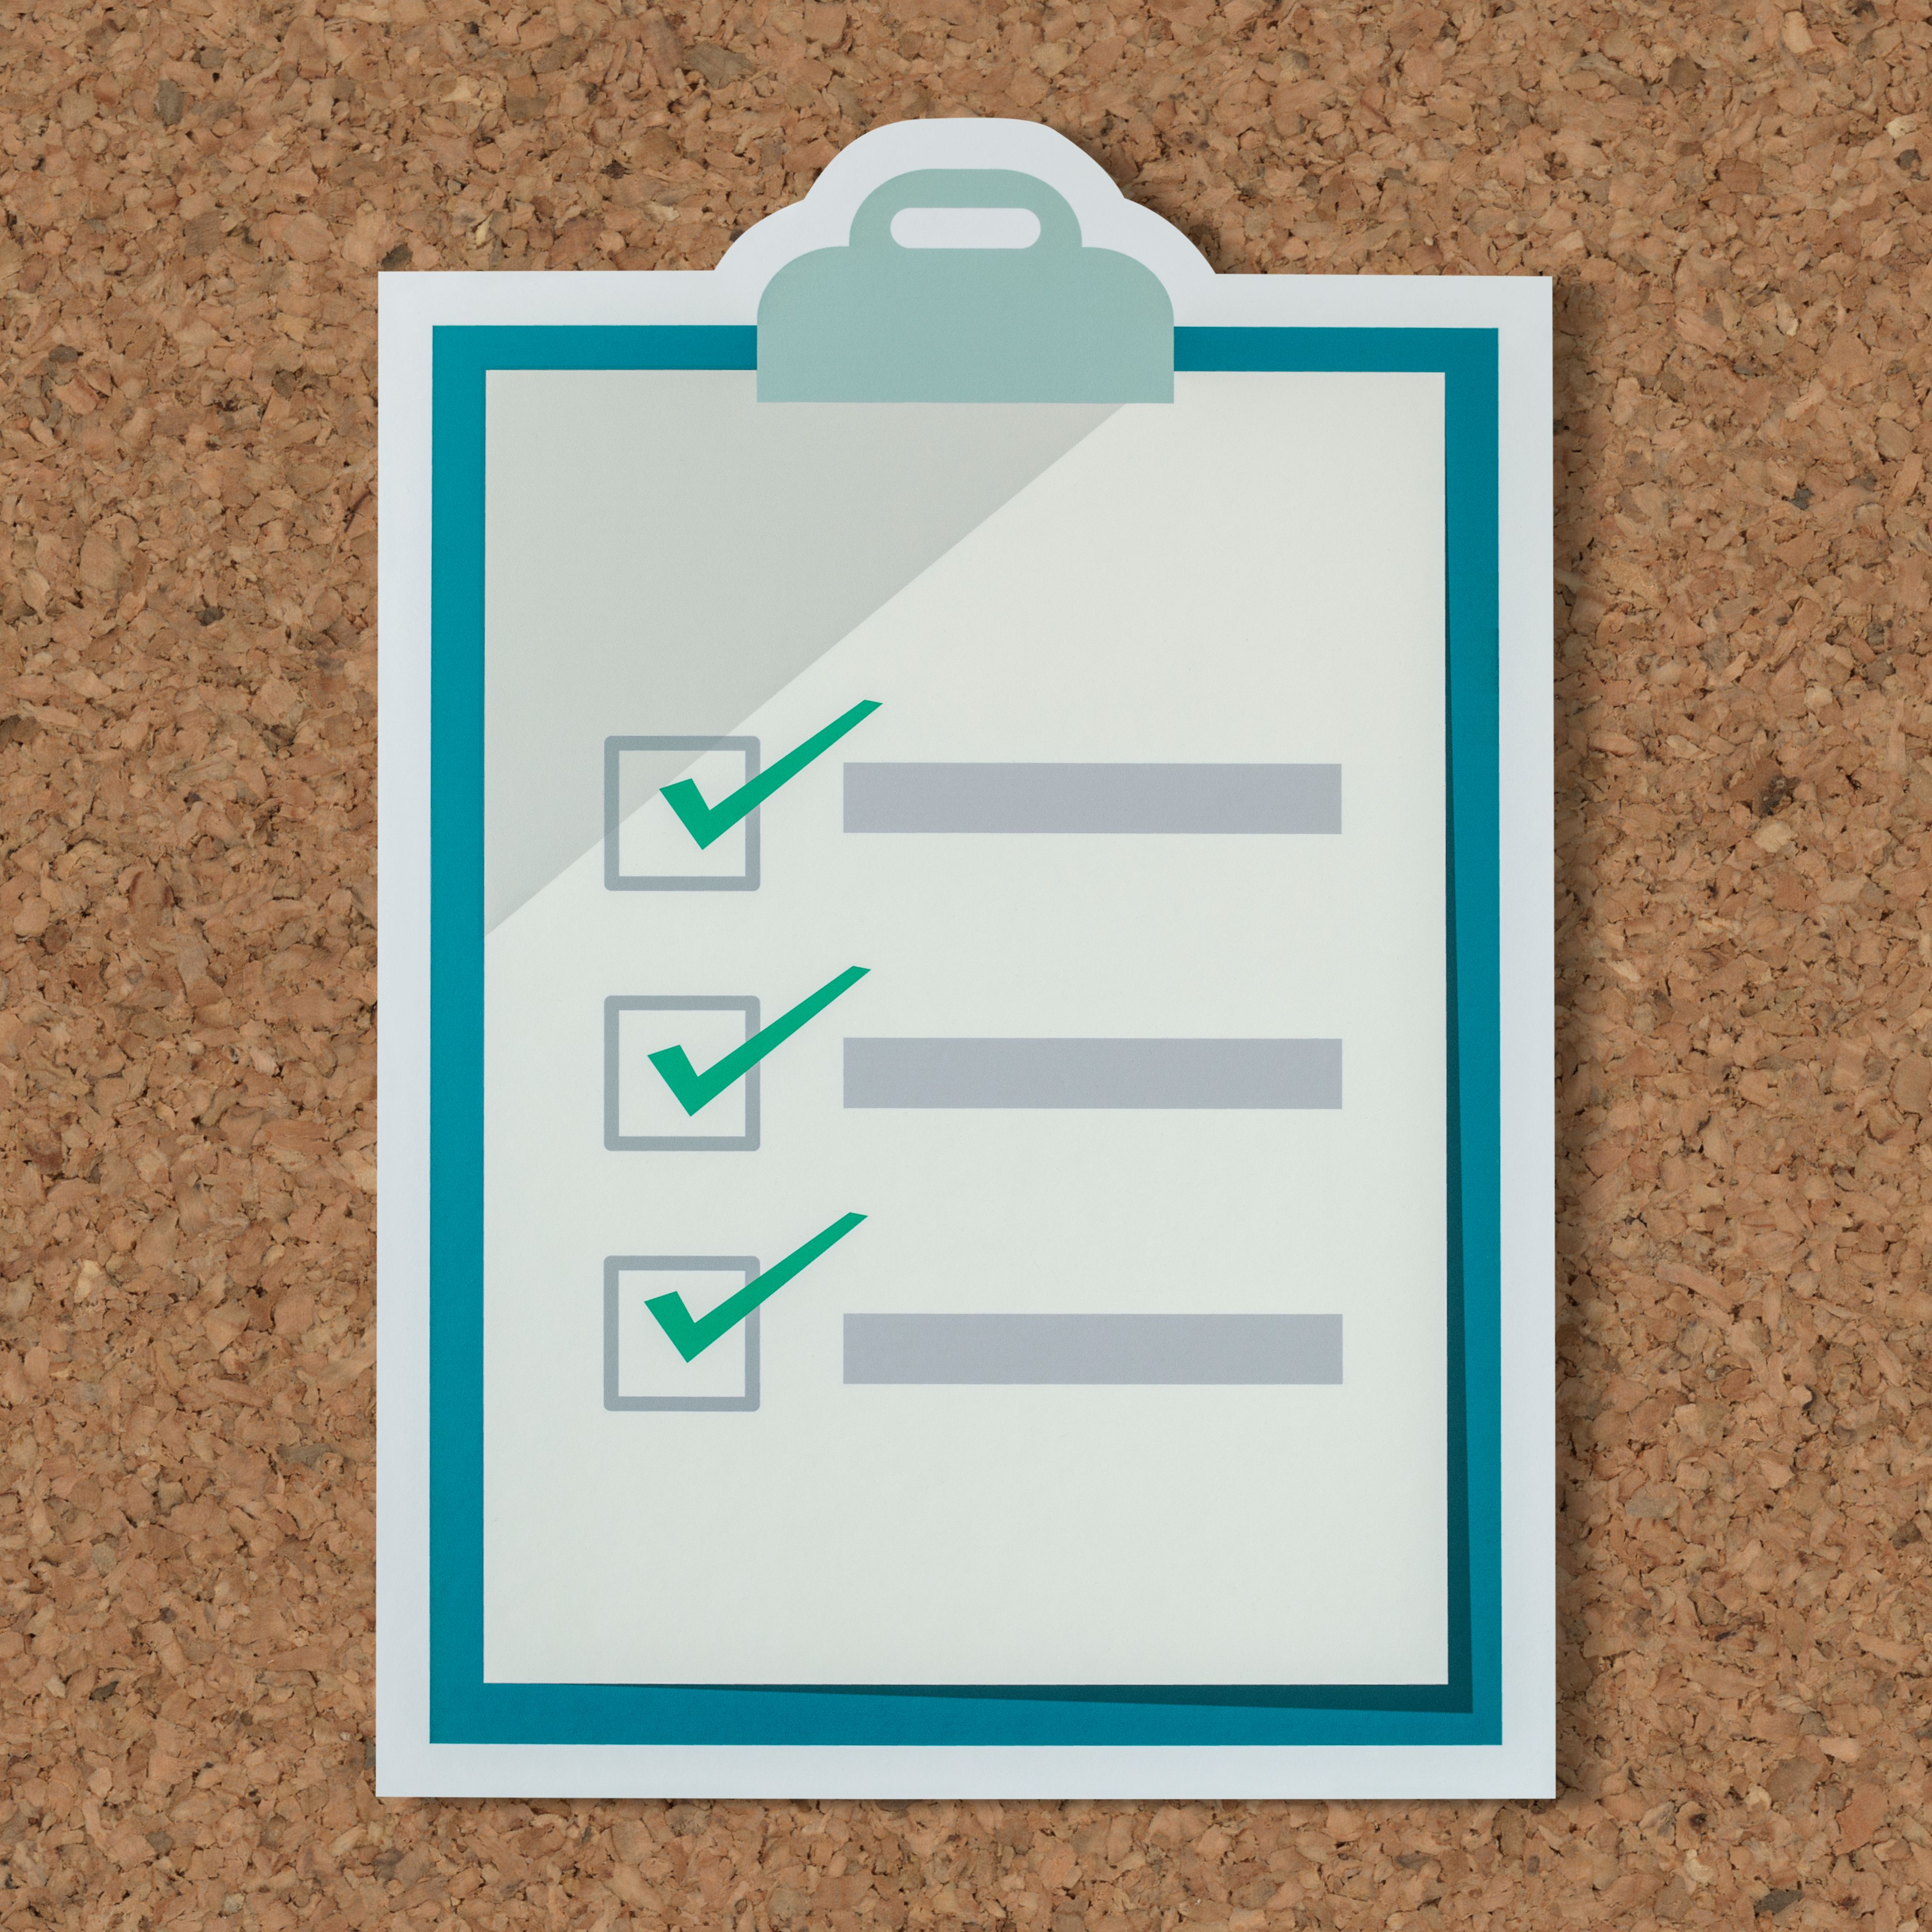 A tenant reference checklist on a wooden floor with all 3 points fully ticked green for approval.